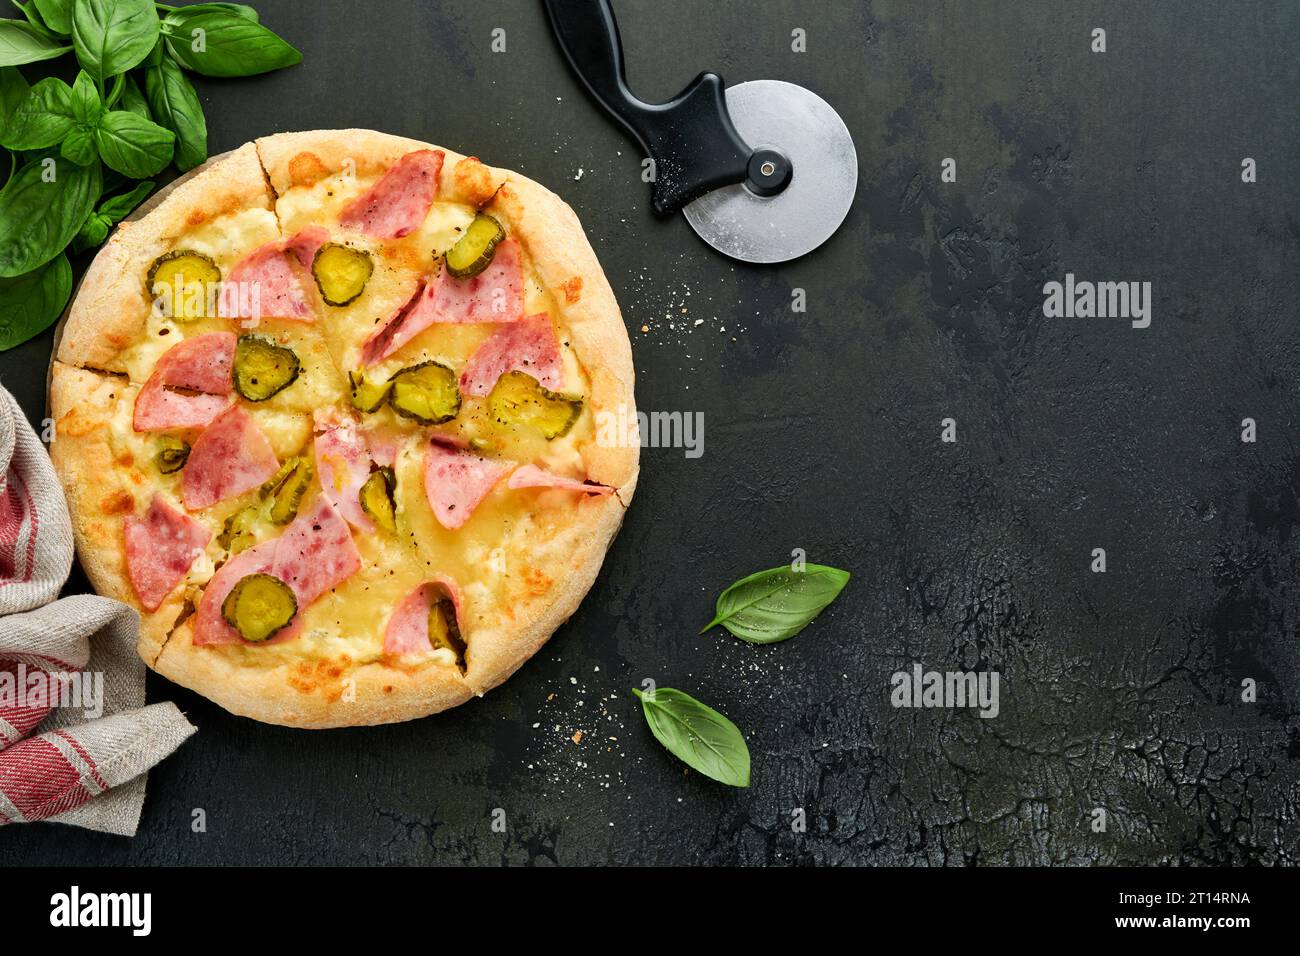 Pizza. Traditional Bacon pizza with ham, mushrooms, pickled cucumber and cheese and cooking ingredients tomatoes basil on wooden table backgrounds. It Stock Photo